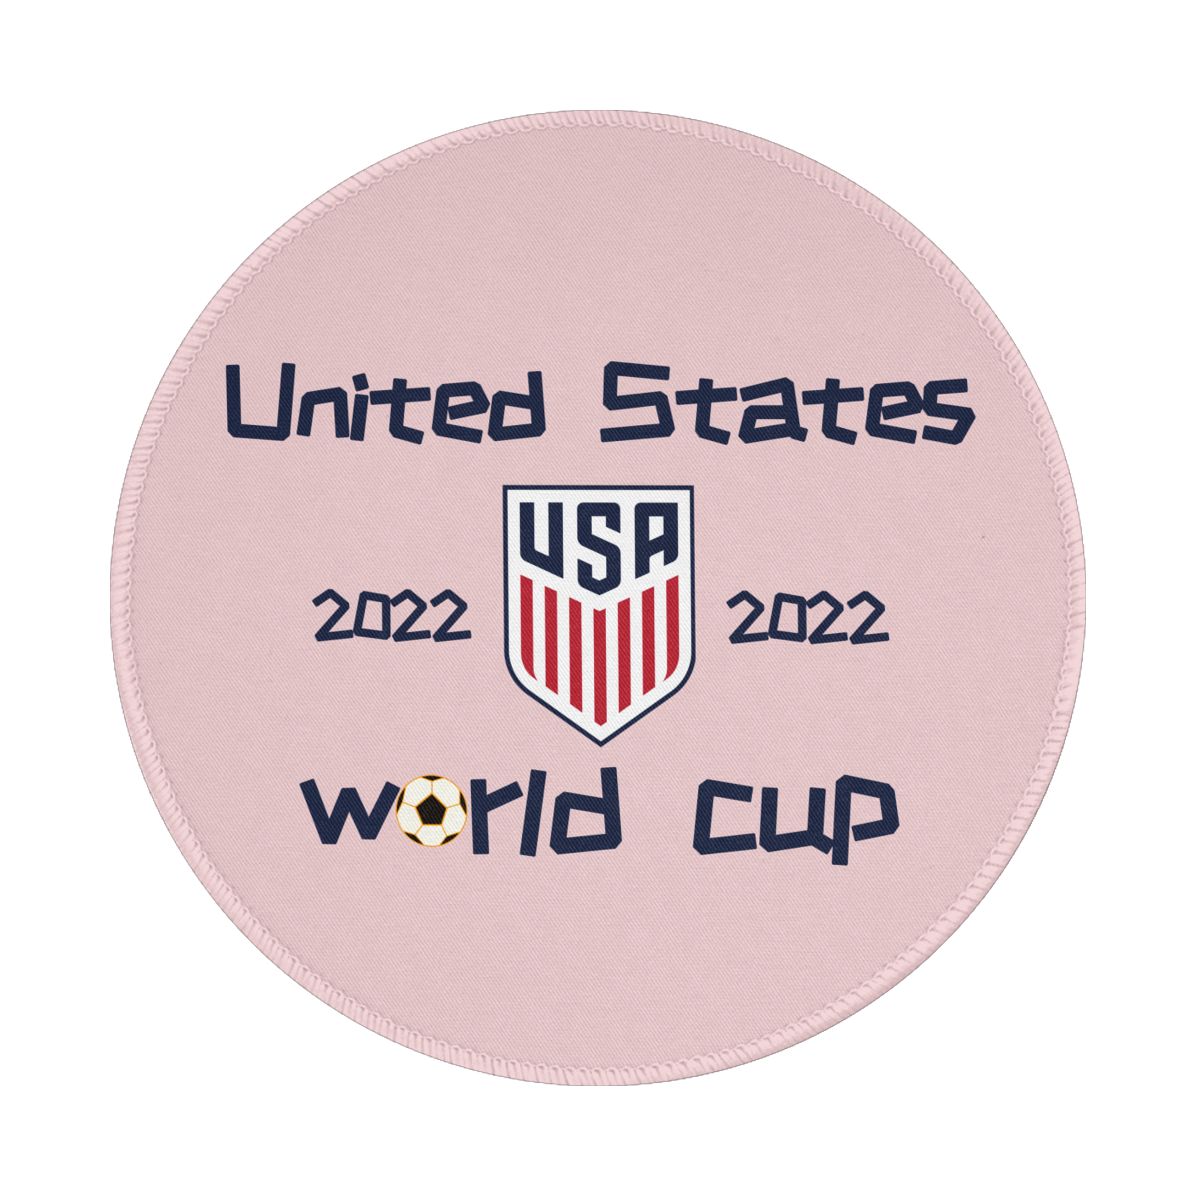 United States 2022 World Cup Team Logo Round Non-Slip Thick Rubber Modern Gaming Mousepad